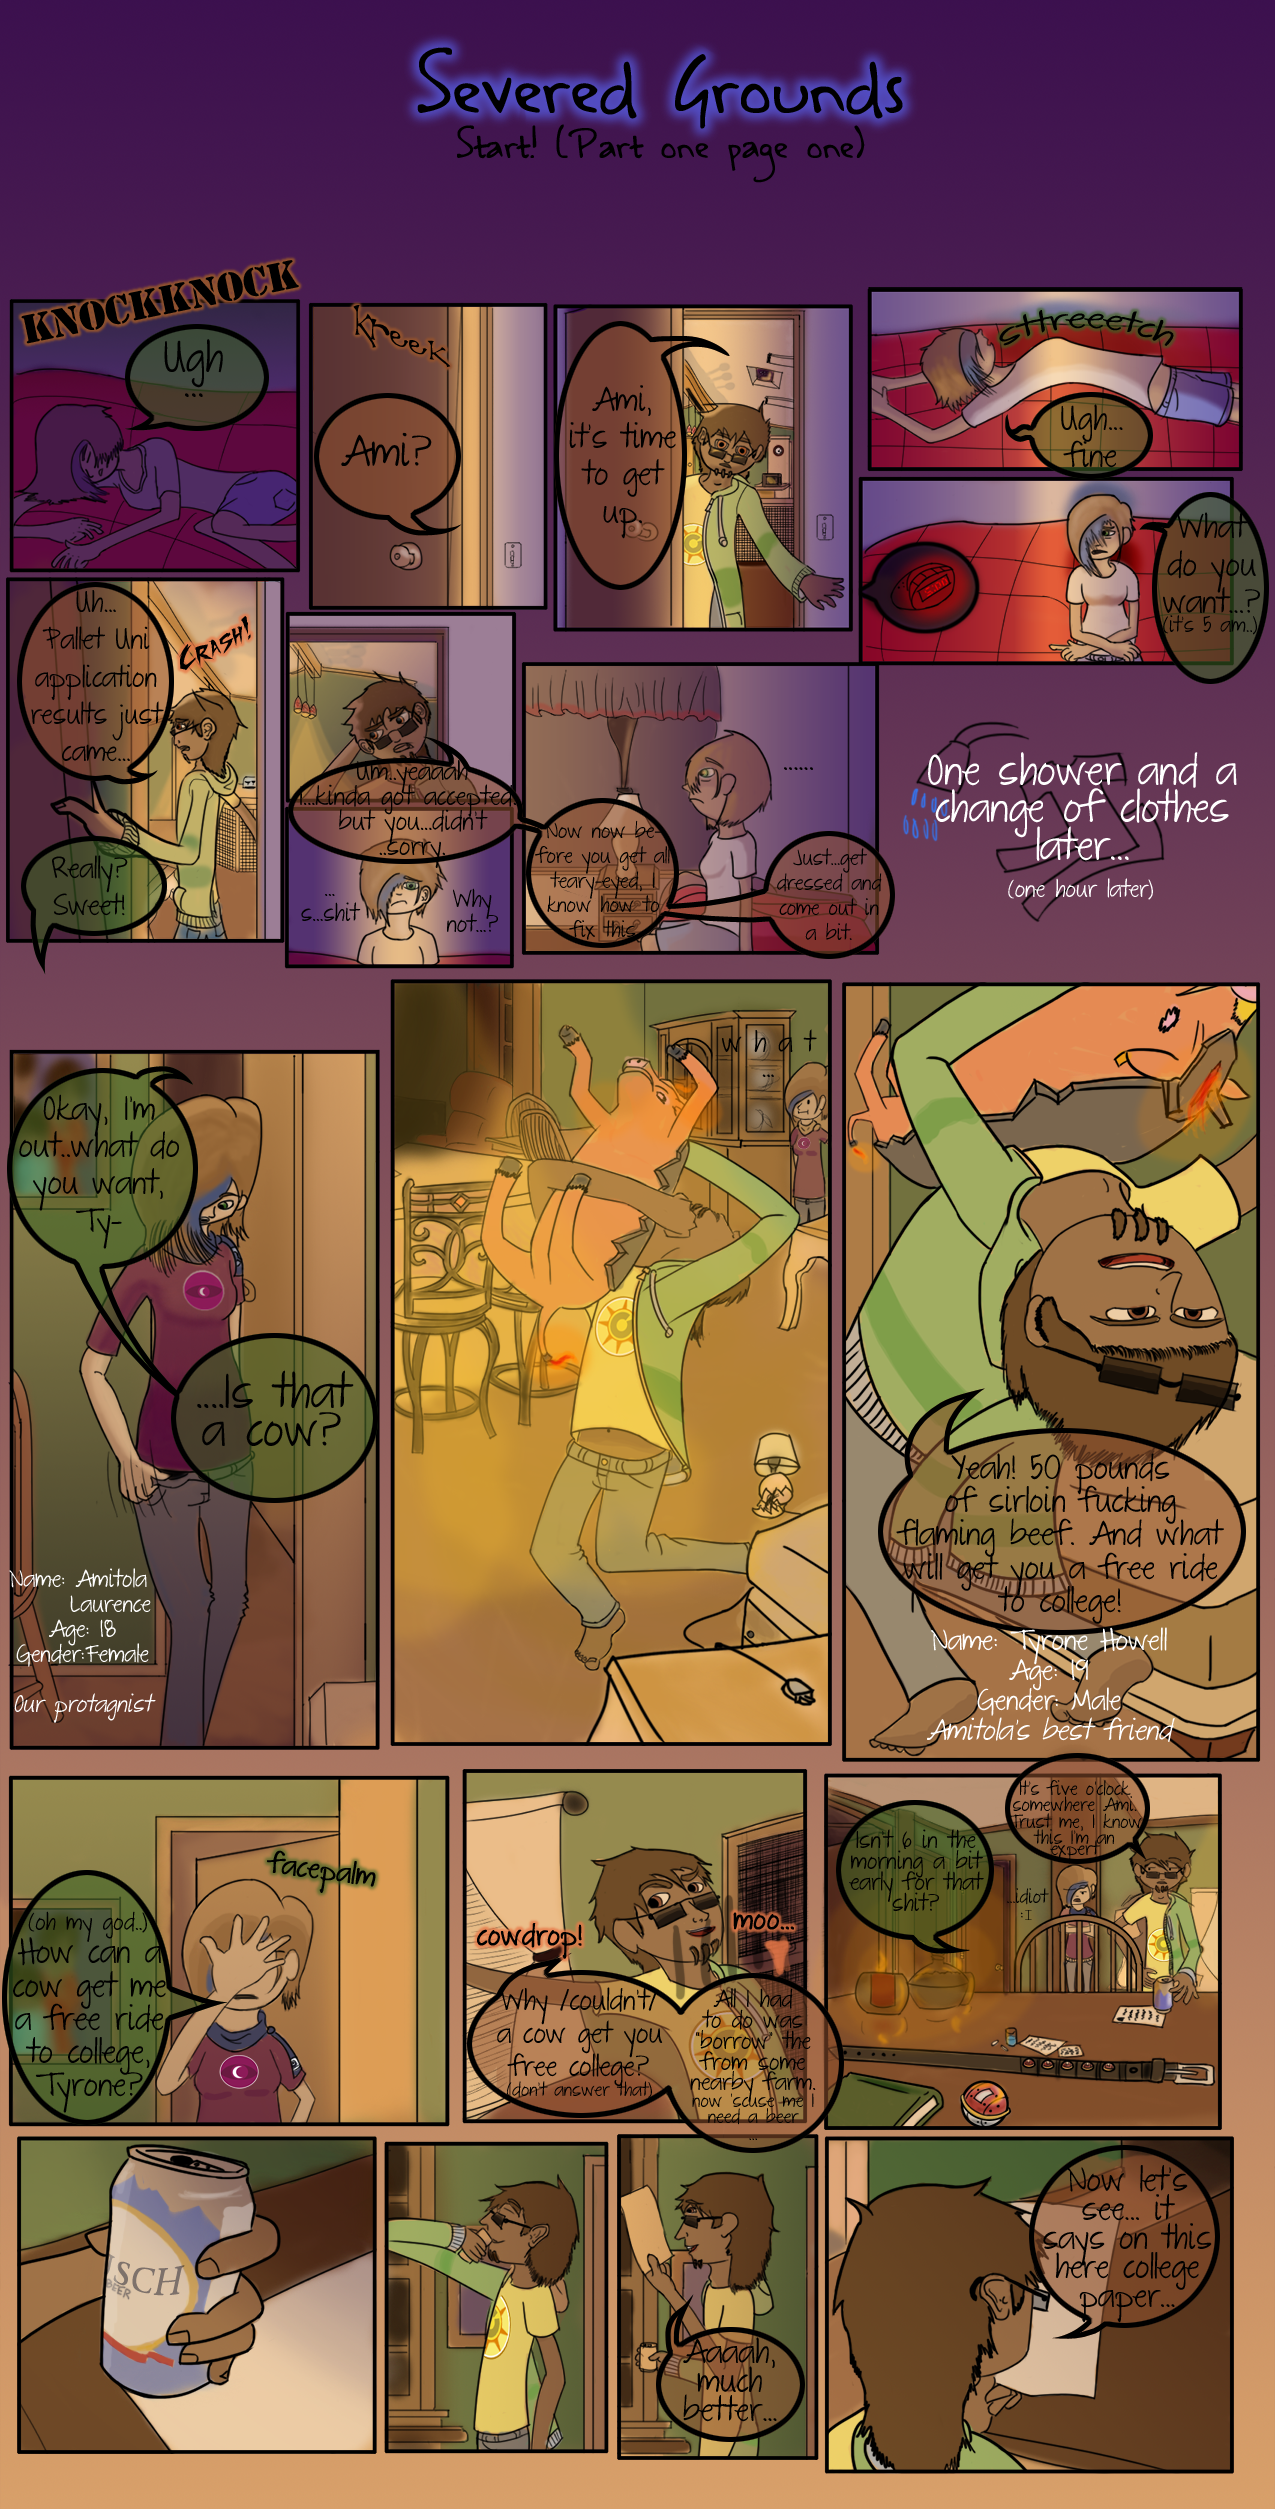 severed_grounds__part_one_page_one_by_boondockartist-d6ocsv8.png